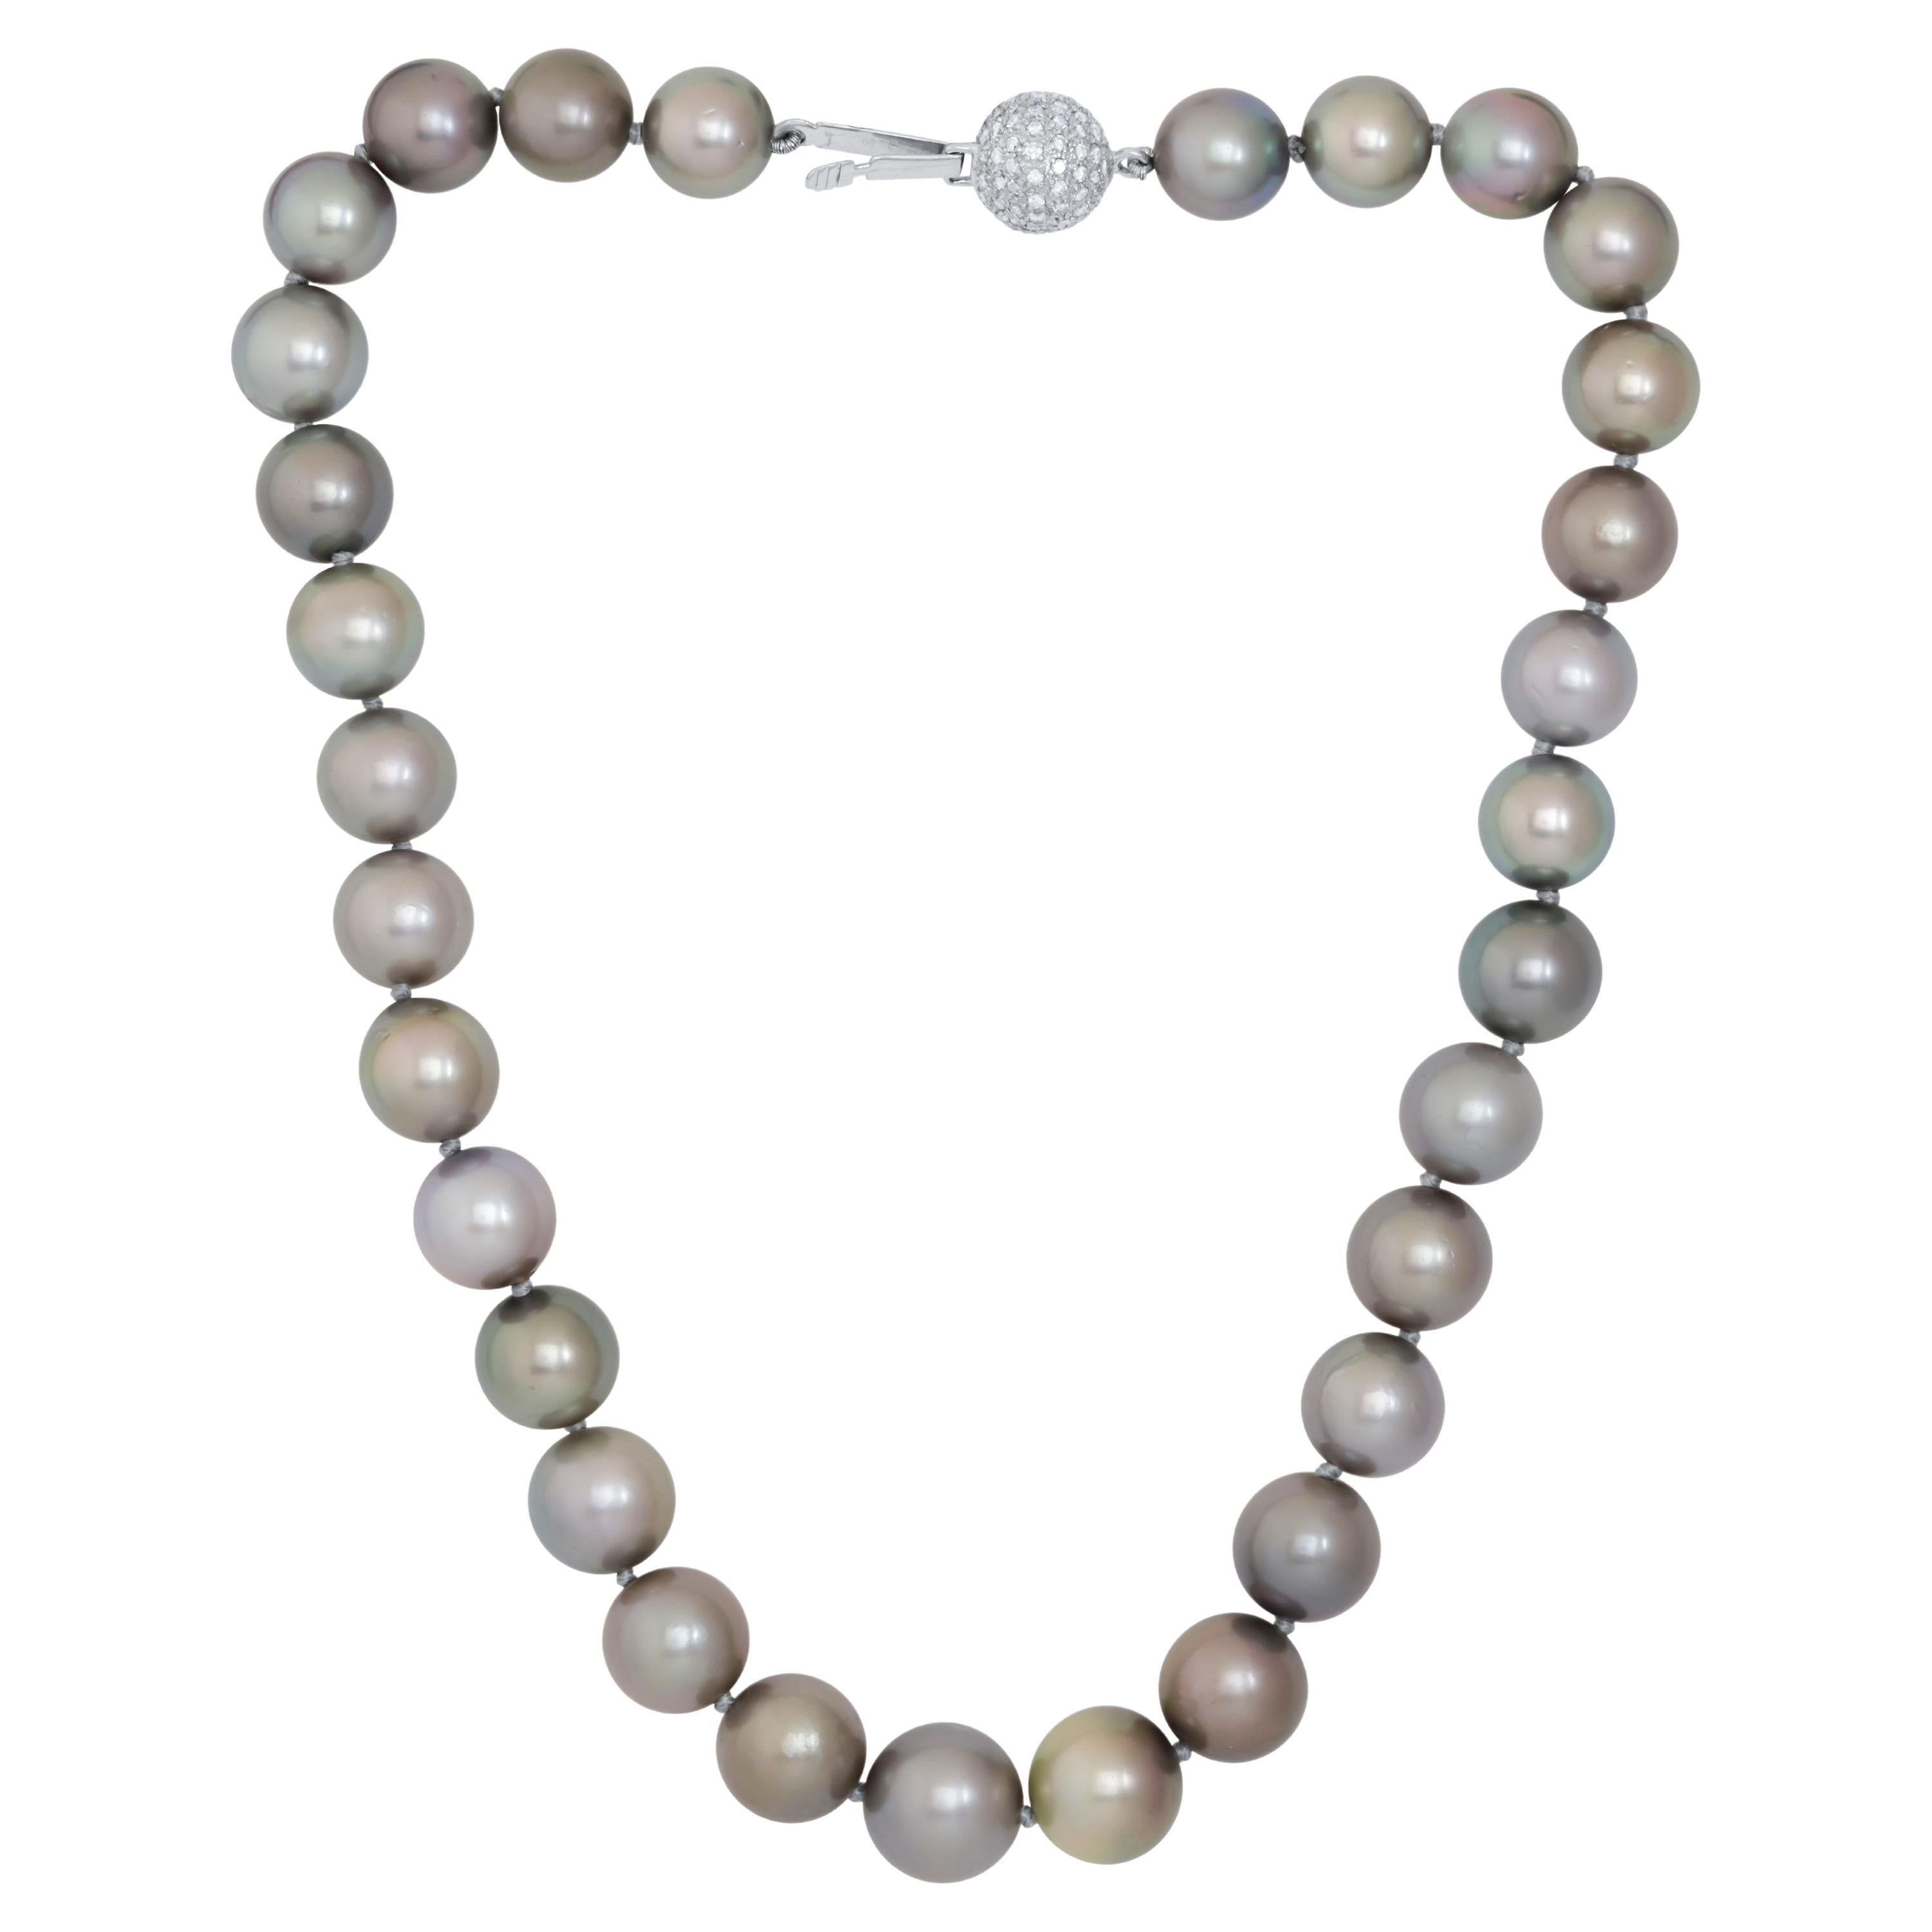 Diana M. 18 kt white gold pearl necklace adorned with black pearls and clip